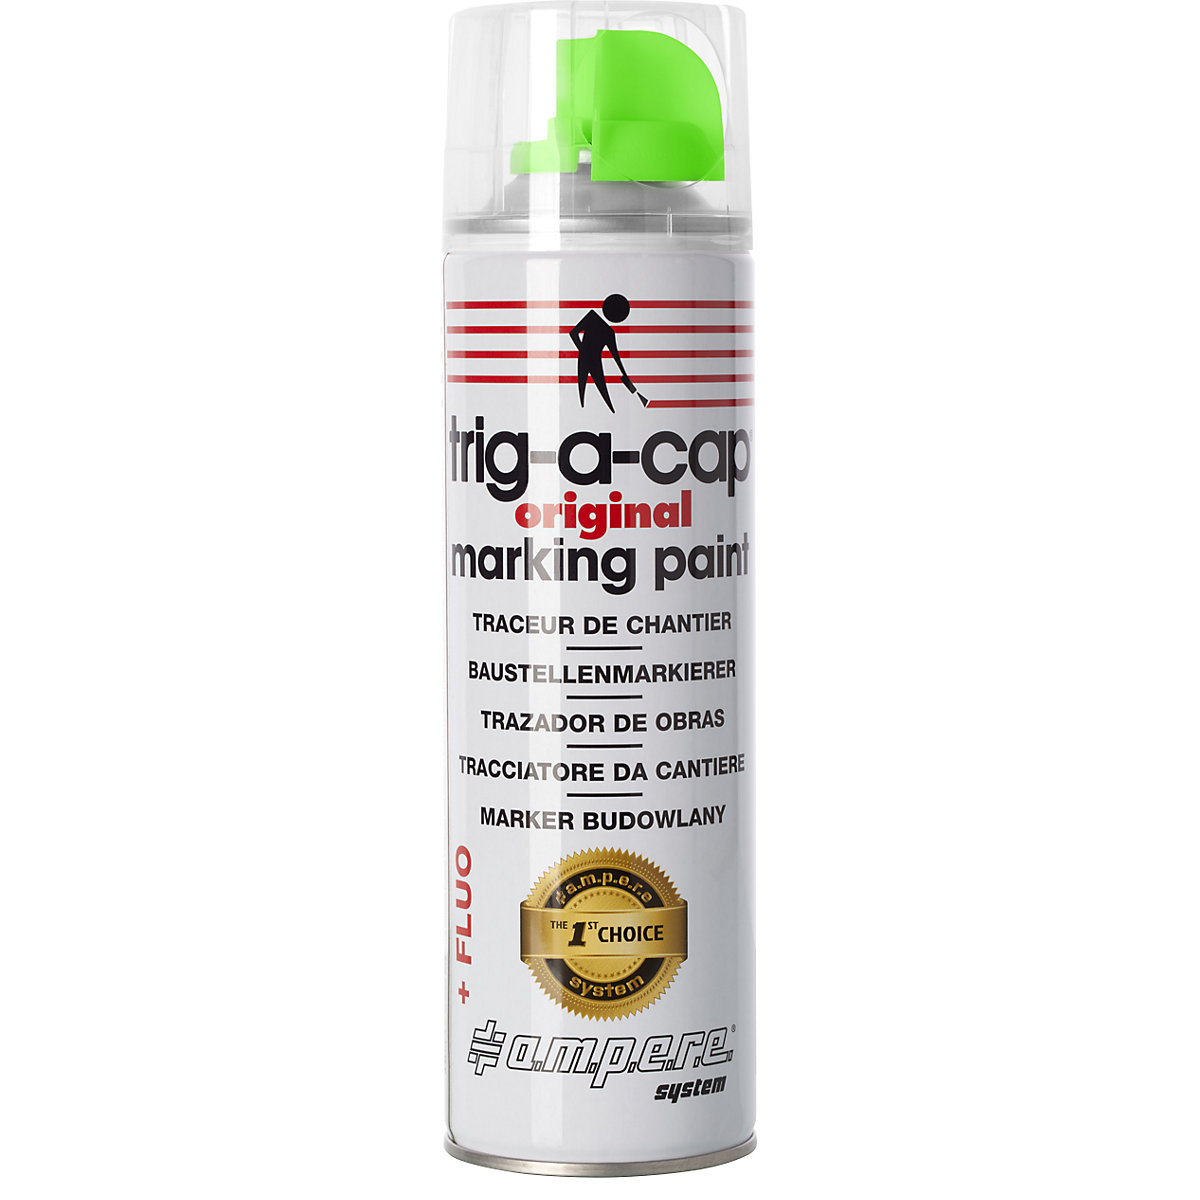 Construction site marking spray – Ampere, content 500 ml, solvent-based, pack of 12 cans, green fluo-3